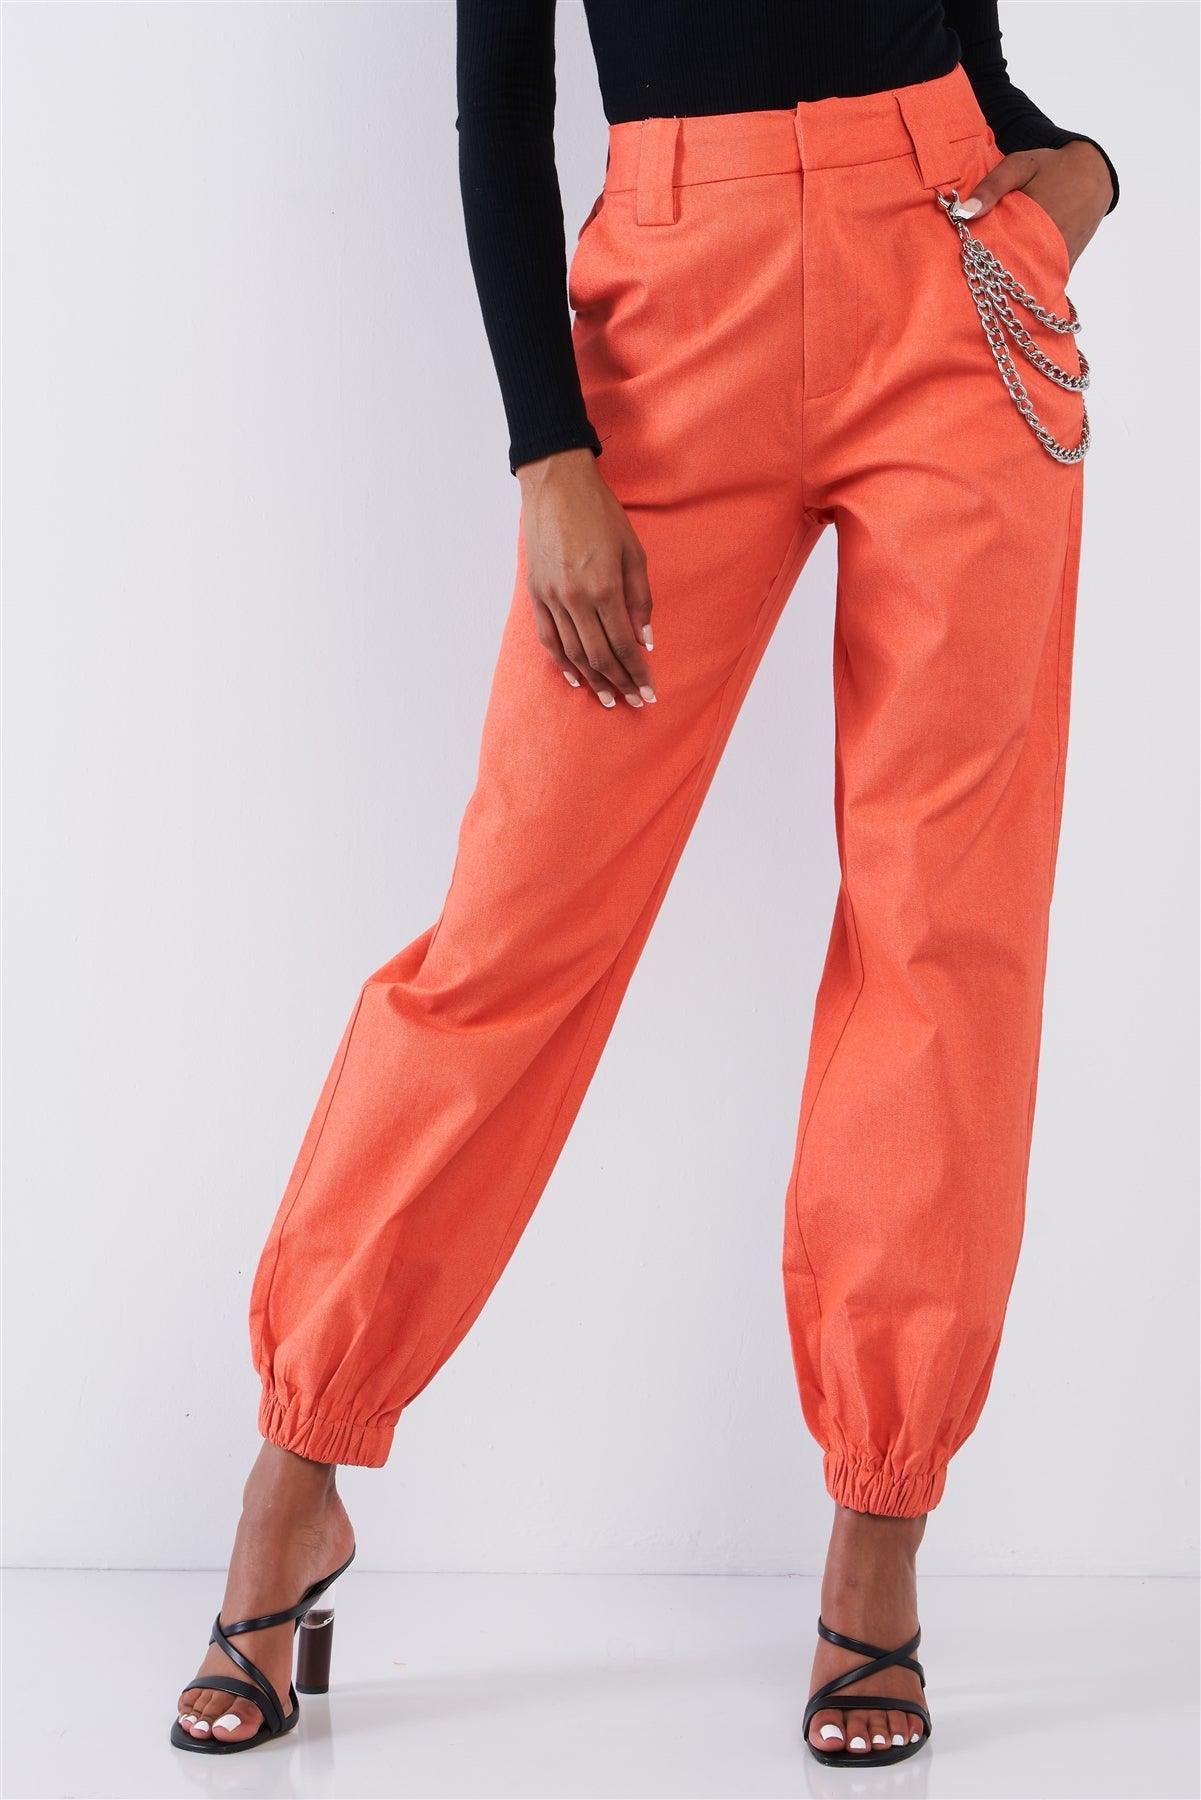 Solid Orange Parachute Cargo Jogger Pants With Chain Hardware Detail